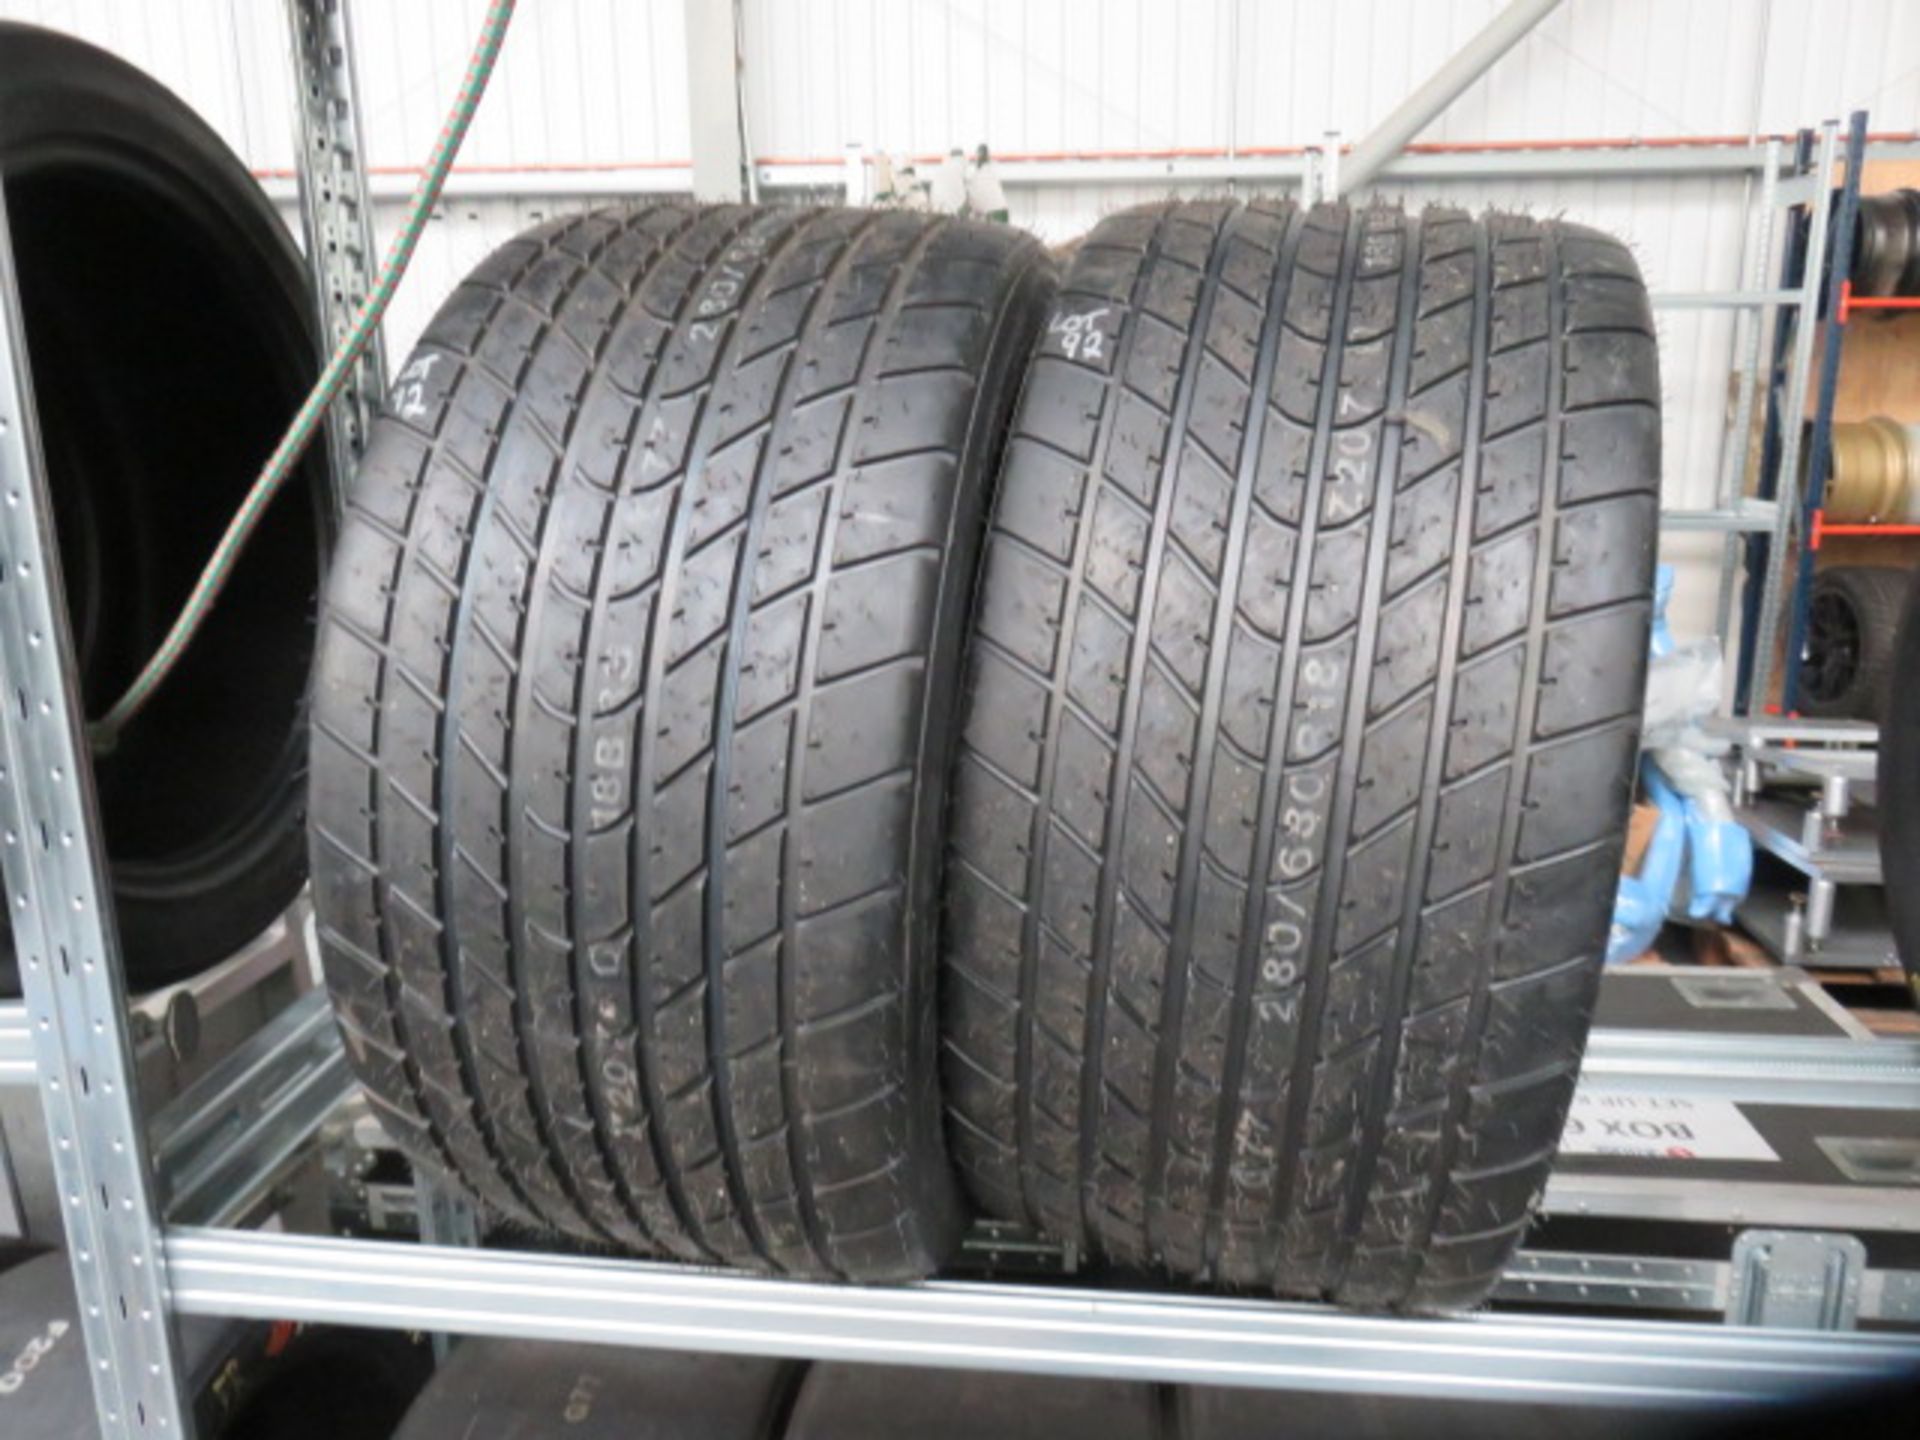 2 x New Hankook 280/680R18 Wet Rear Tyres As Lotted